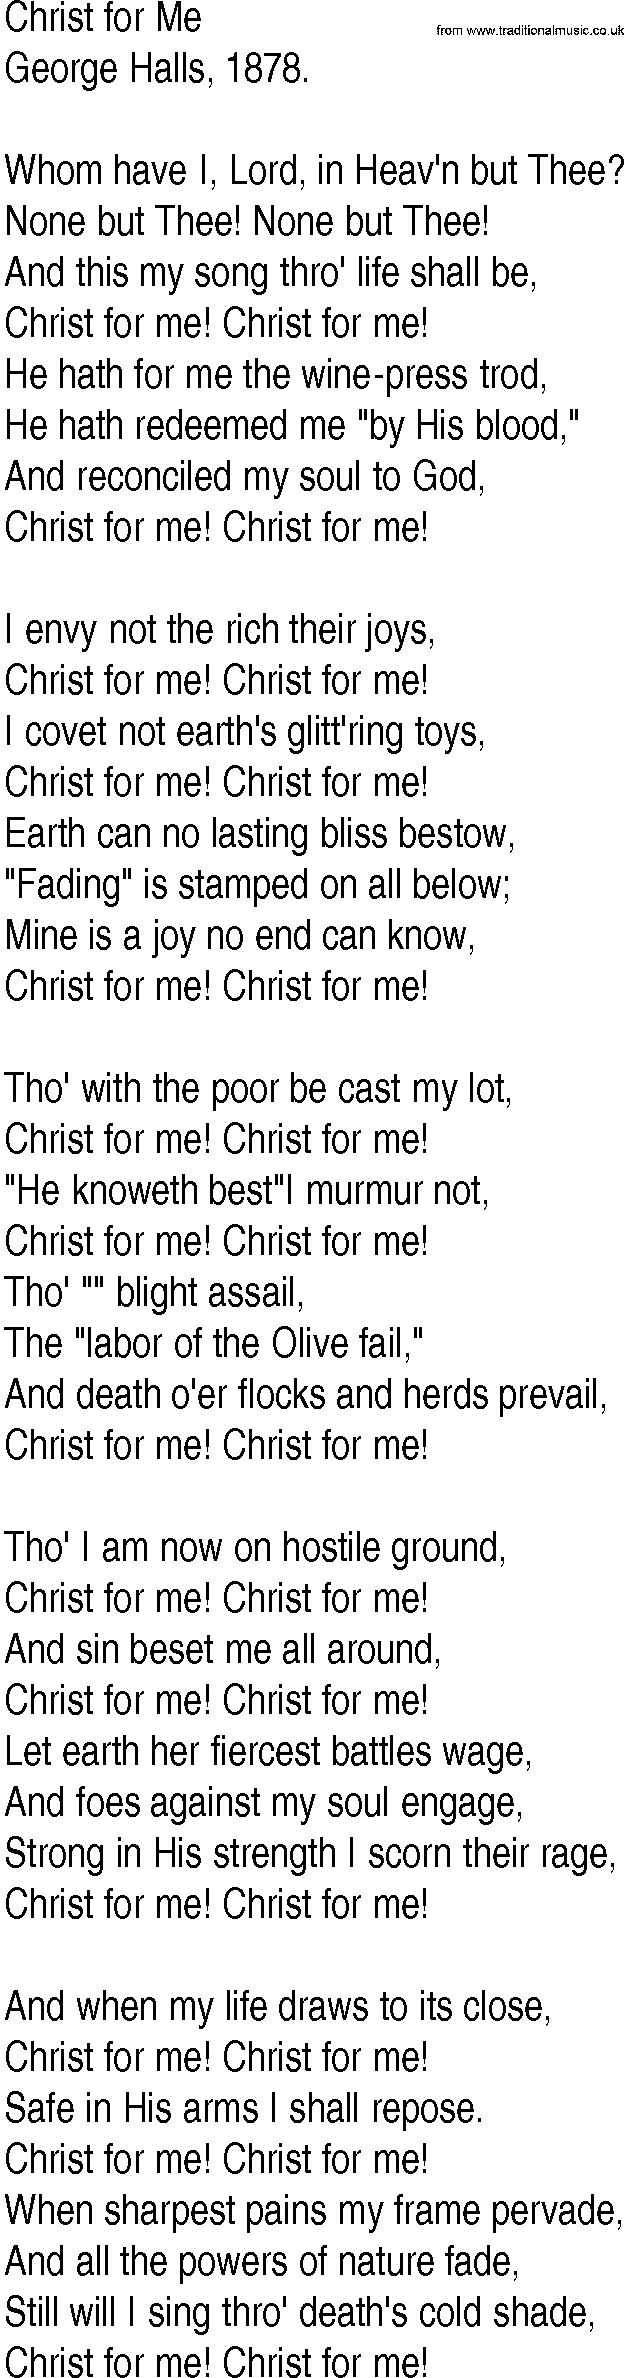 Hymn and Gospel Song: Christ for Me by George Halls lyrics